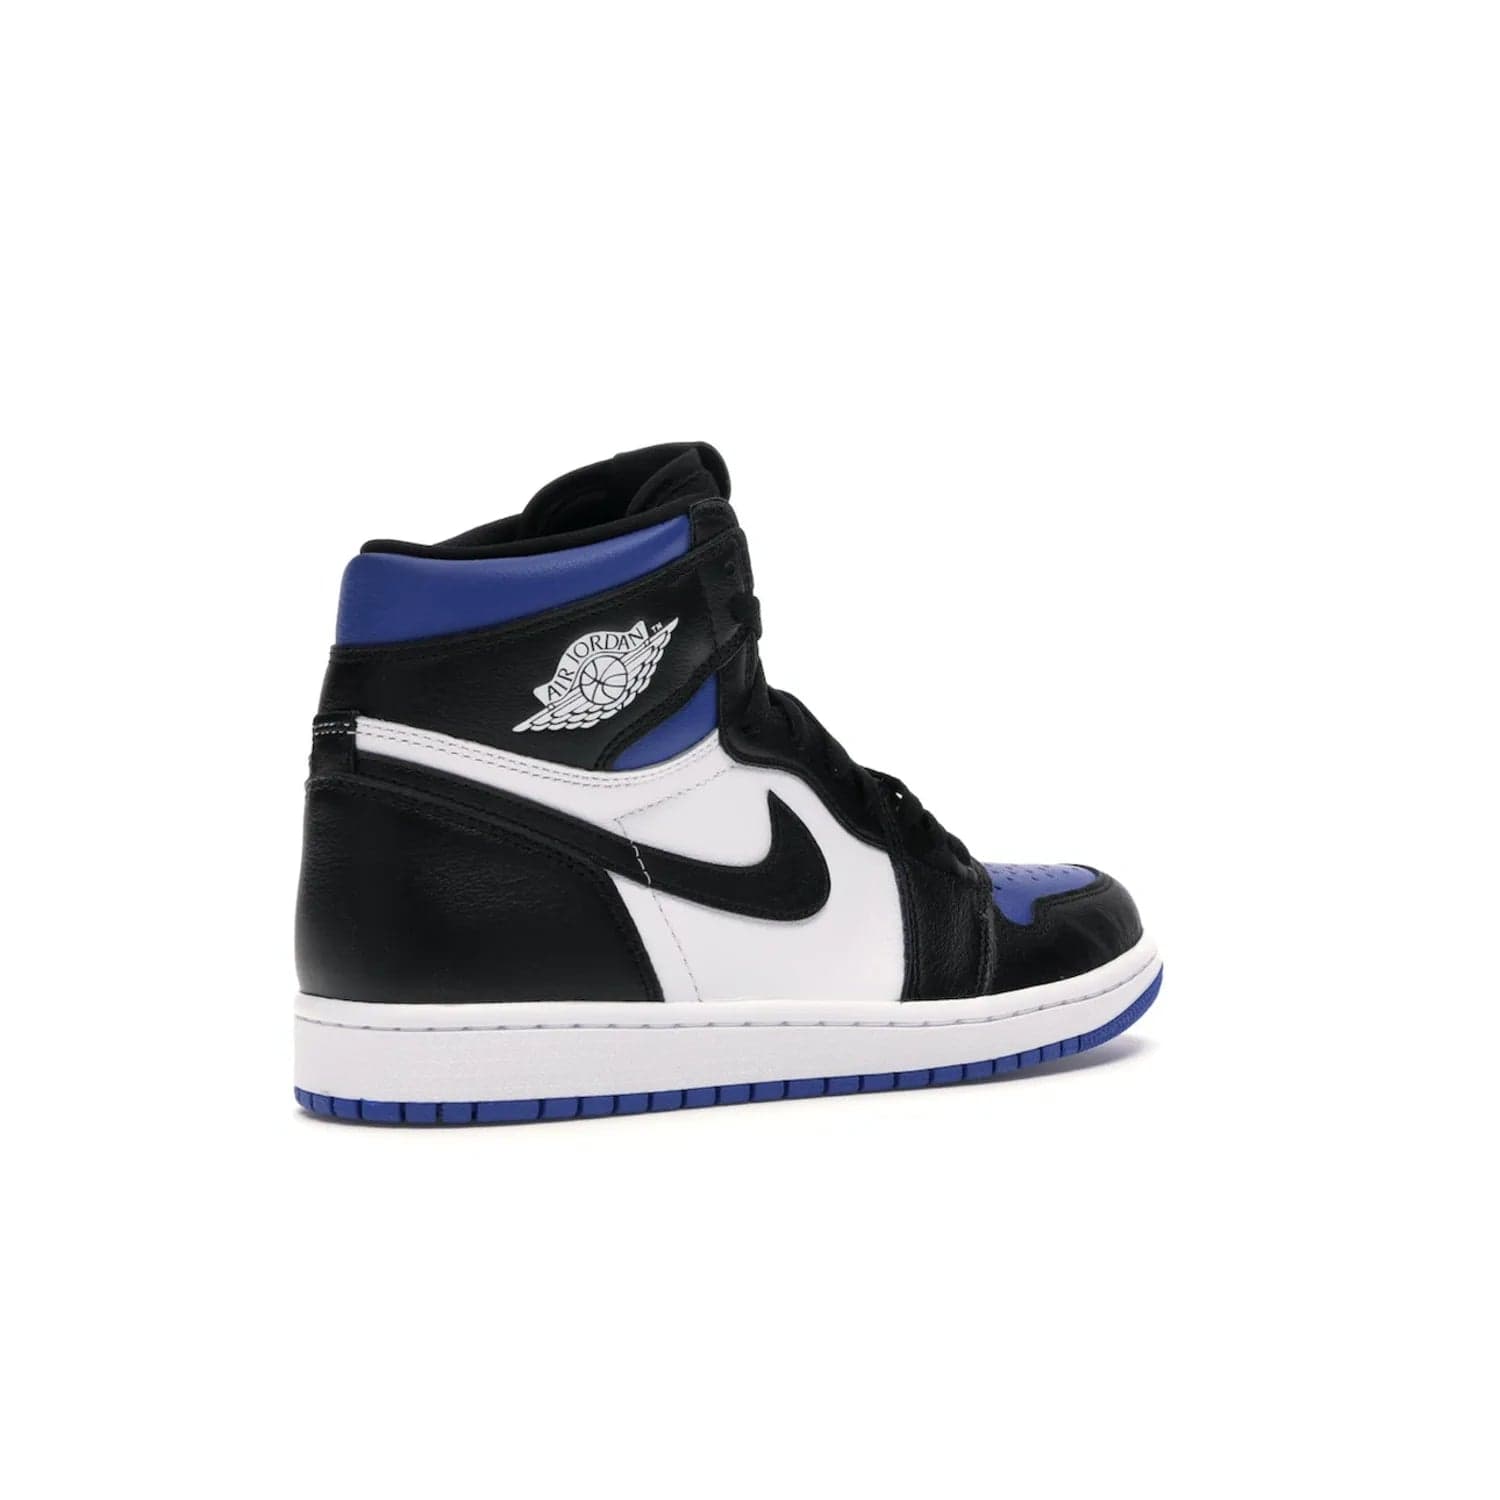 Jordan 1 Retro High Royal Toe - Image 33 - Only at www.BallersClubKickz.com - Refresh your look with the Jordan 1 Retro High Royal Toe. This classic AJ 1 sports a white and royal leather upper, black leather overlays, and branded leather tongue tag. Pick up today and set the streets ablaze.